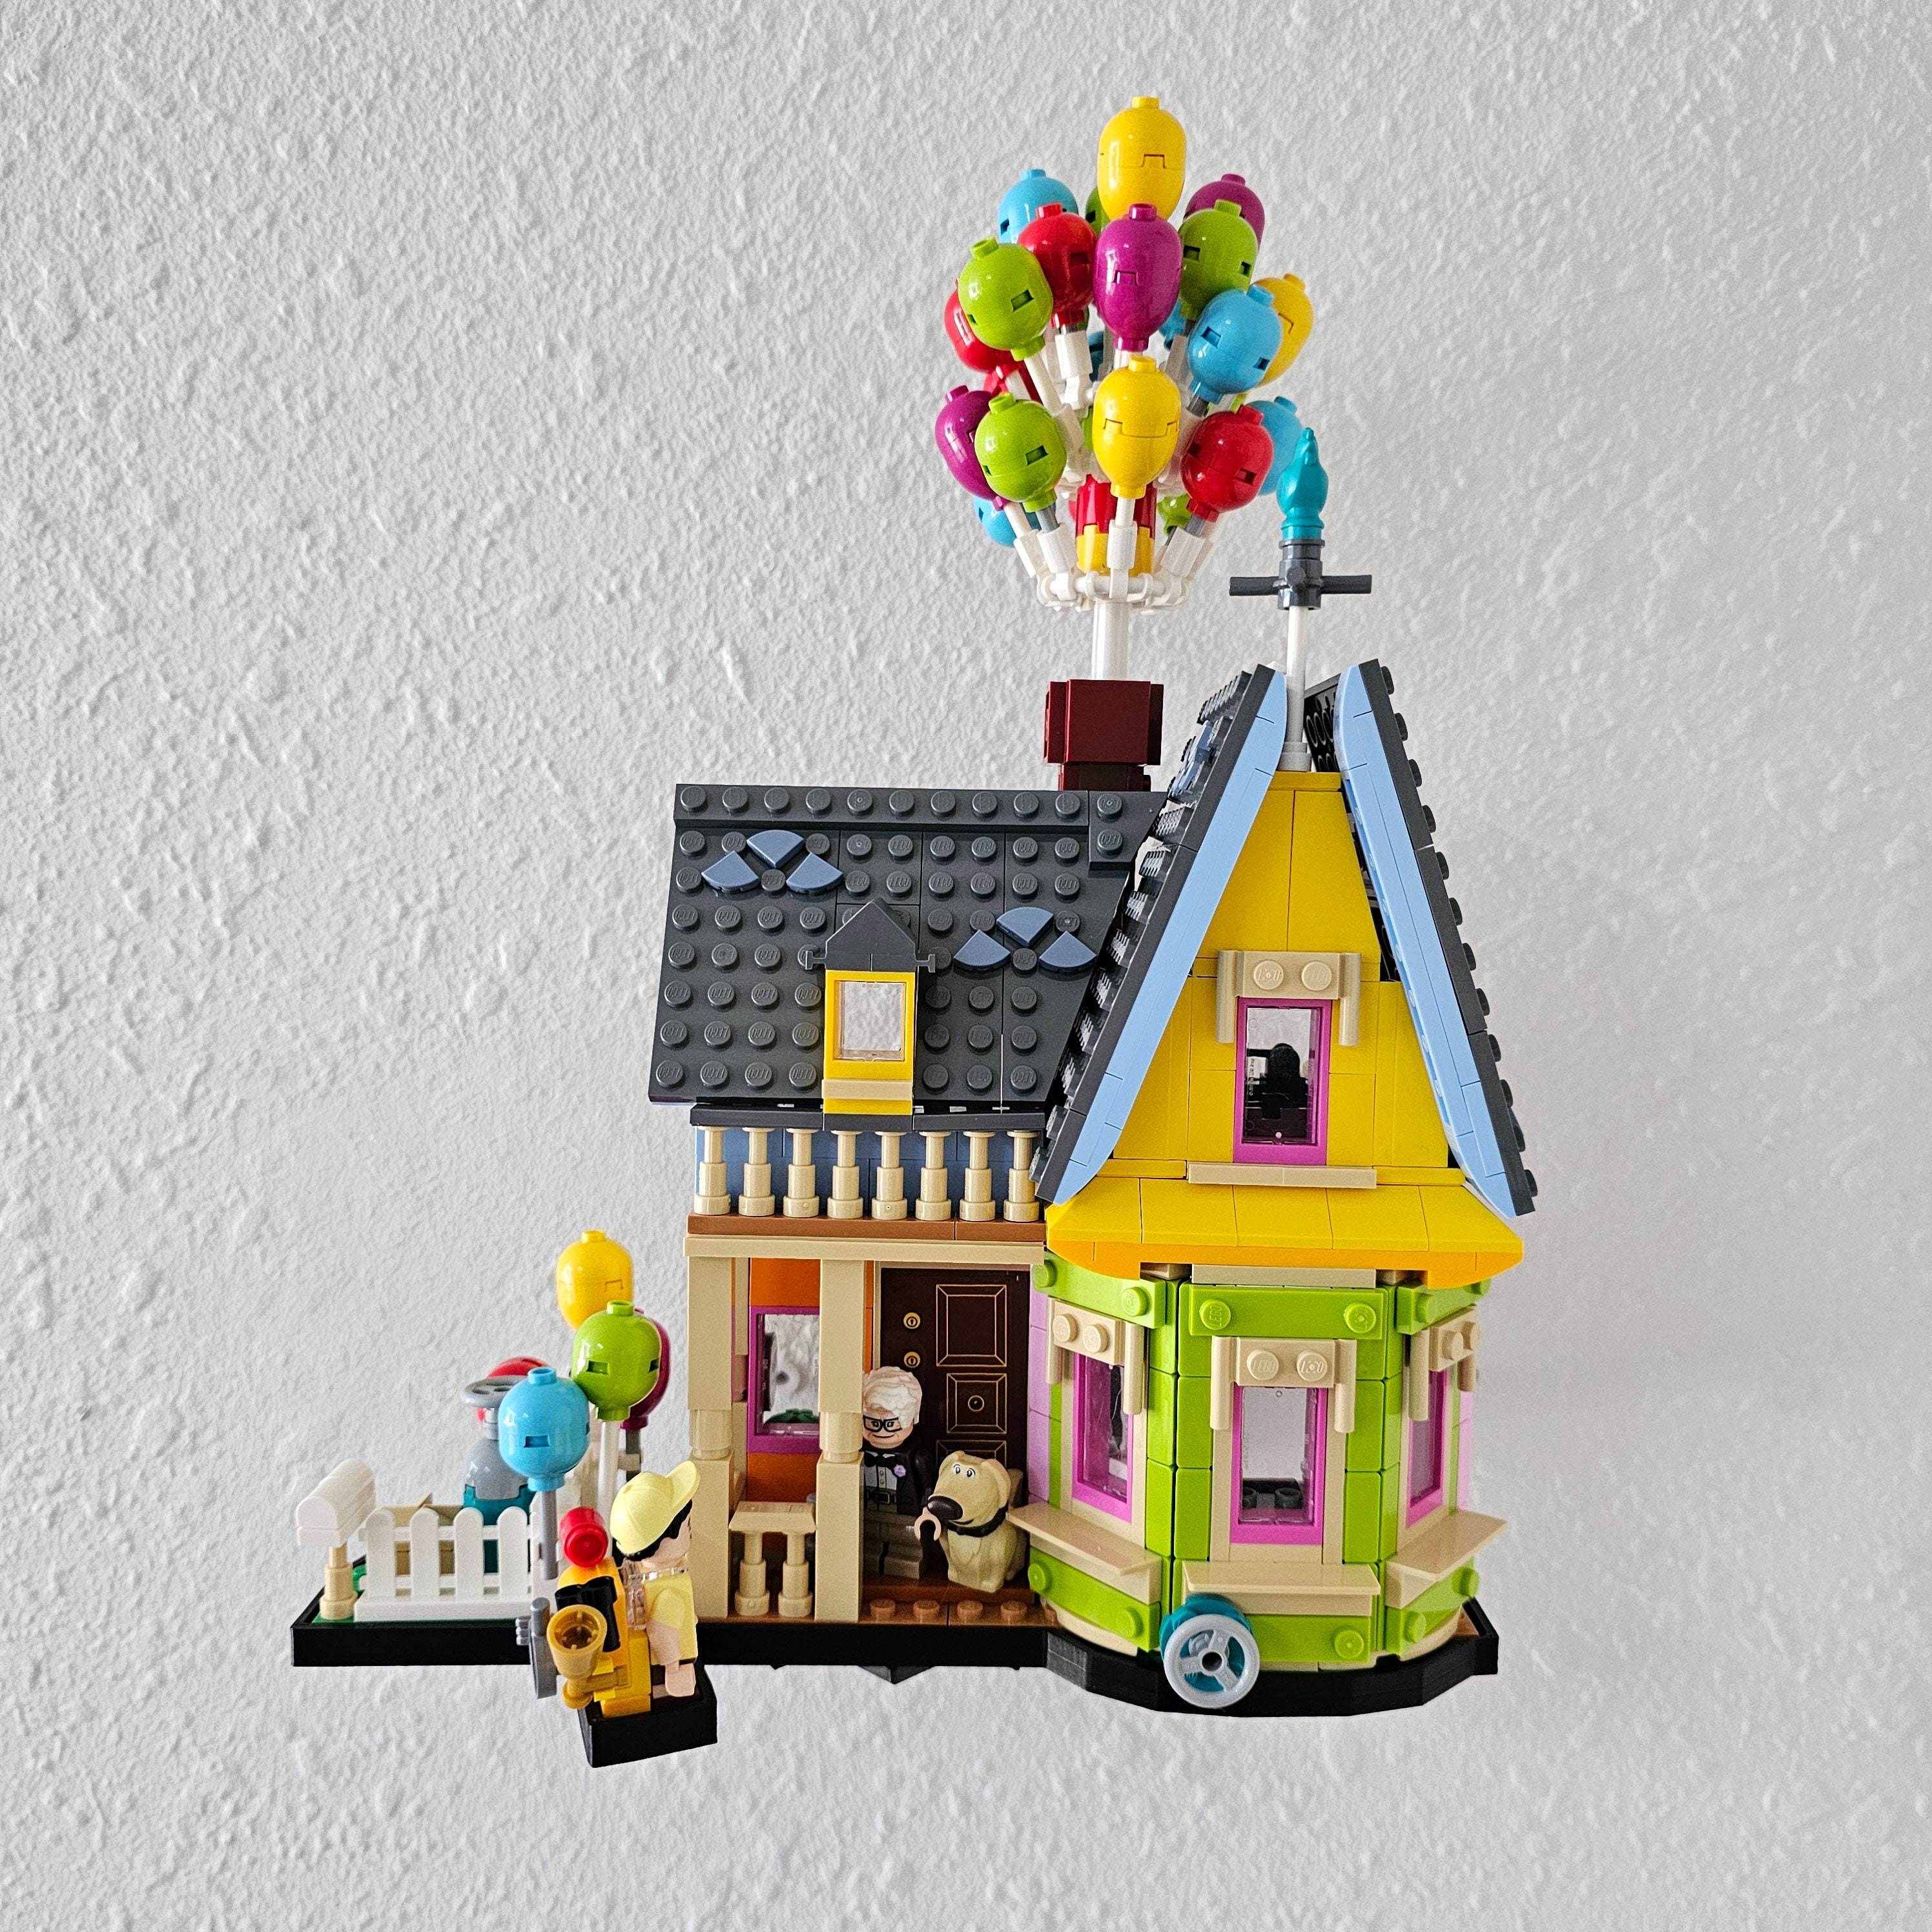 Pixar's Up House Gets A Charming Building Brick Makeover From LEGO